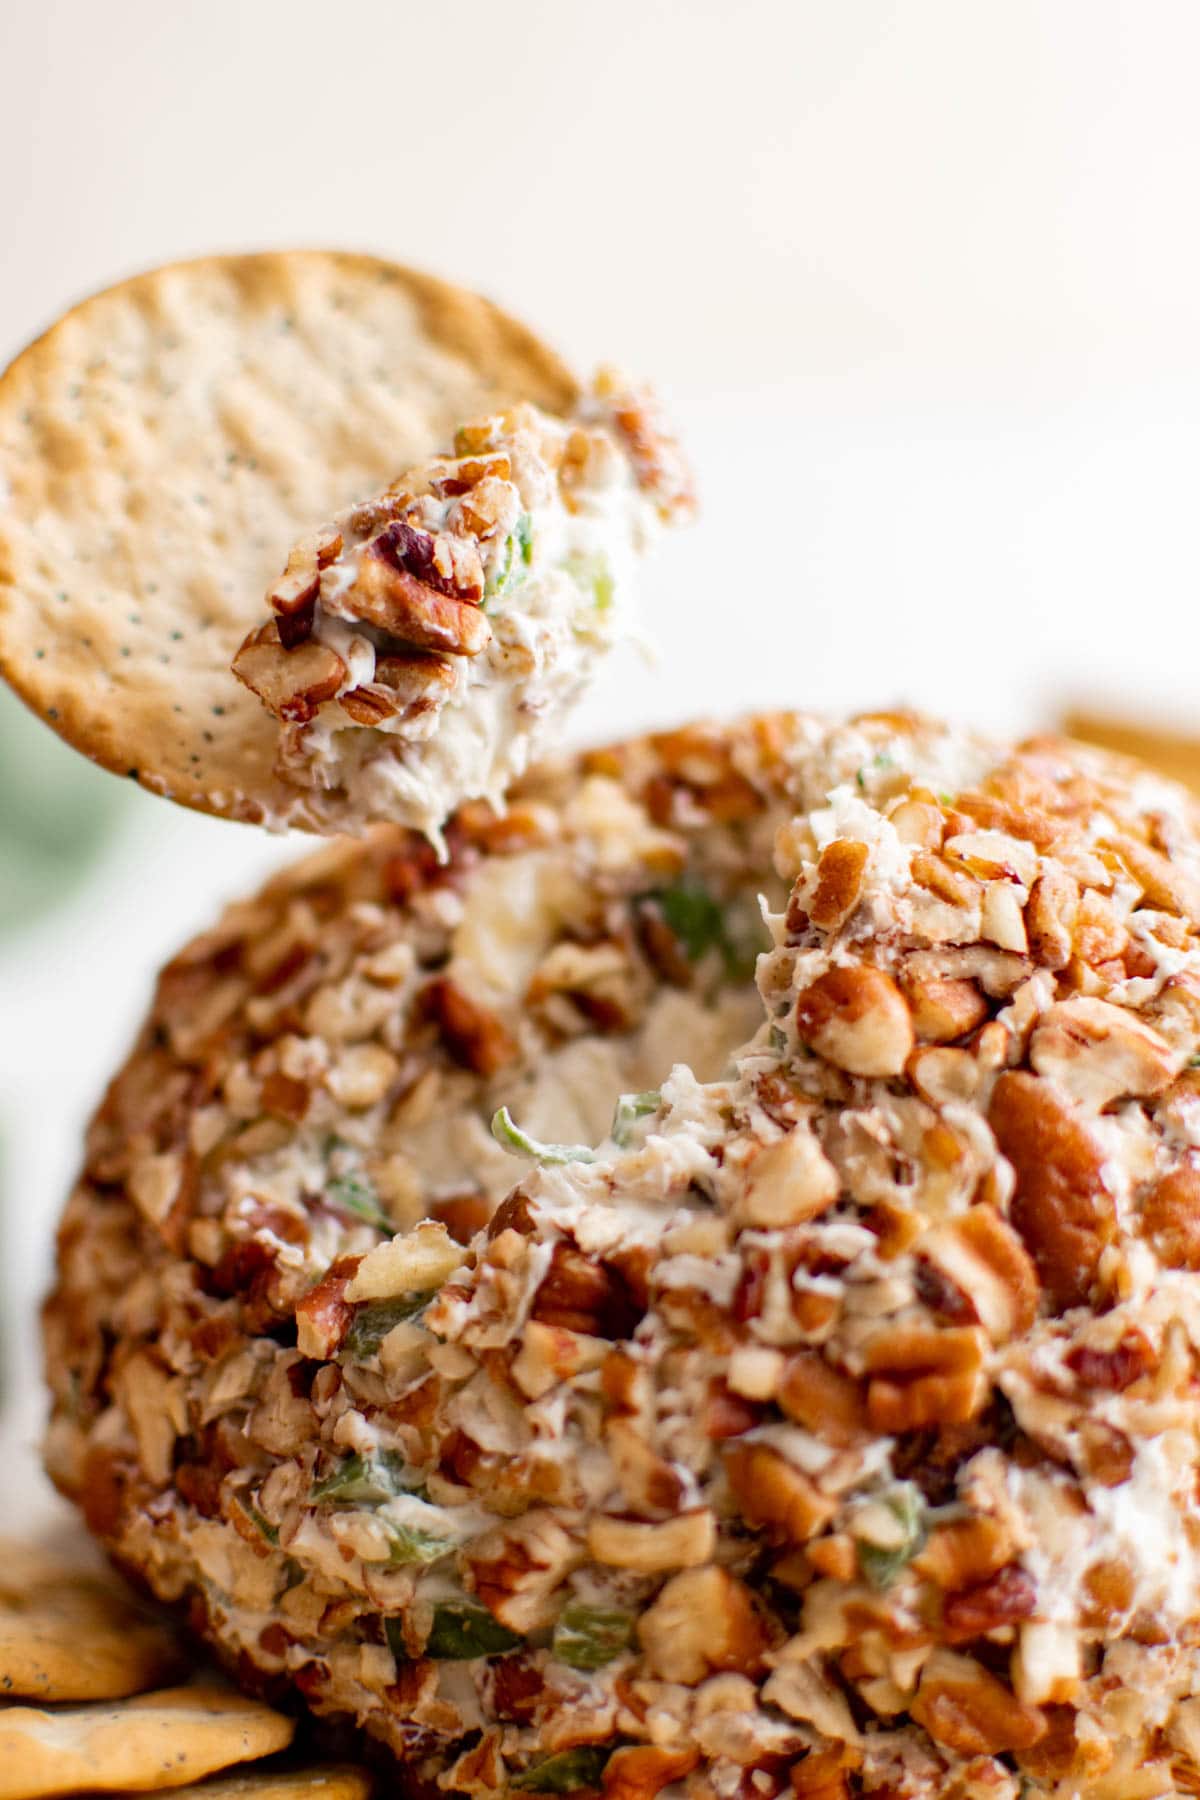 Cheese ball covered in pecans and a crackers with a small bit of dip.